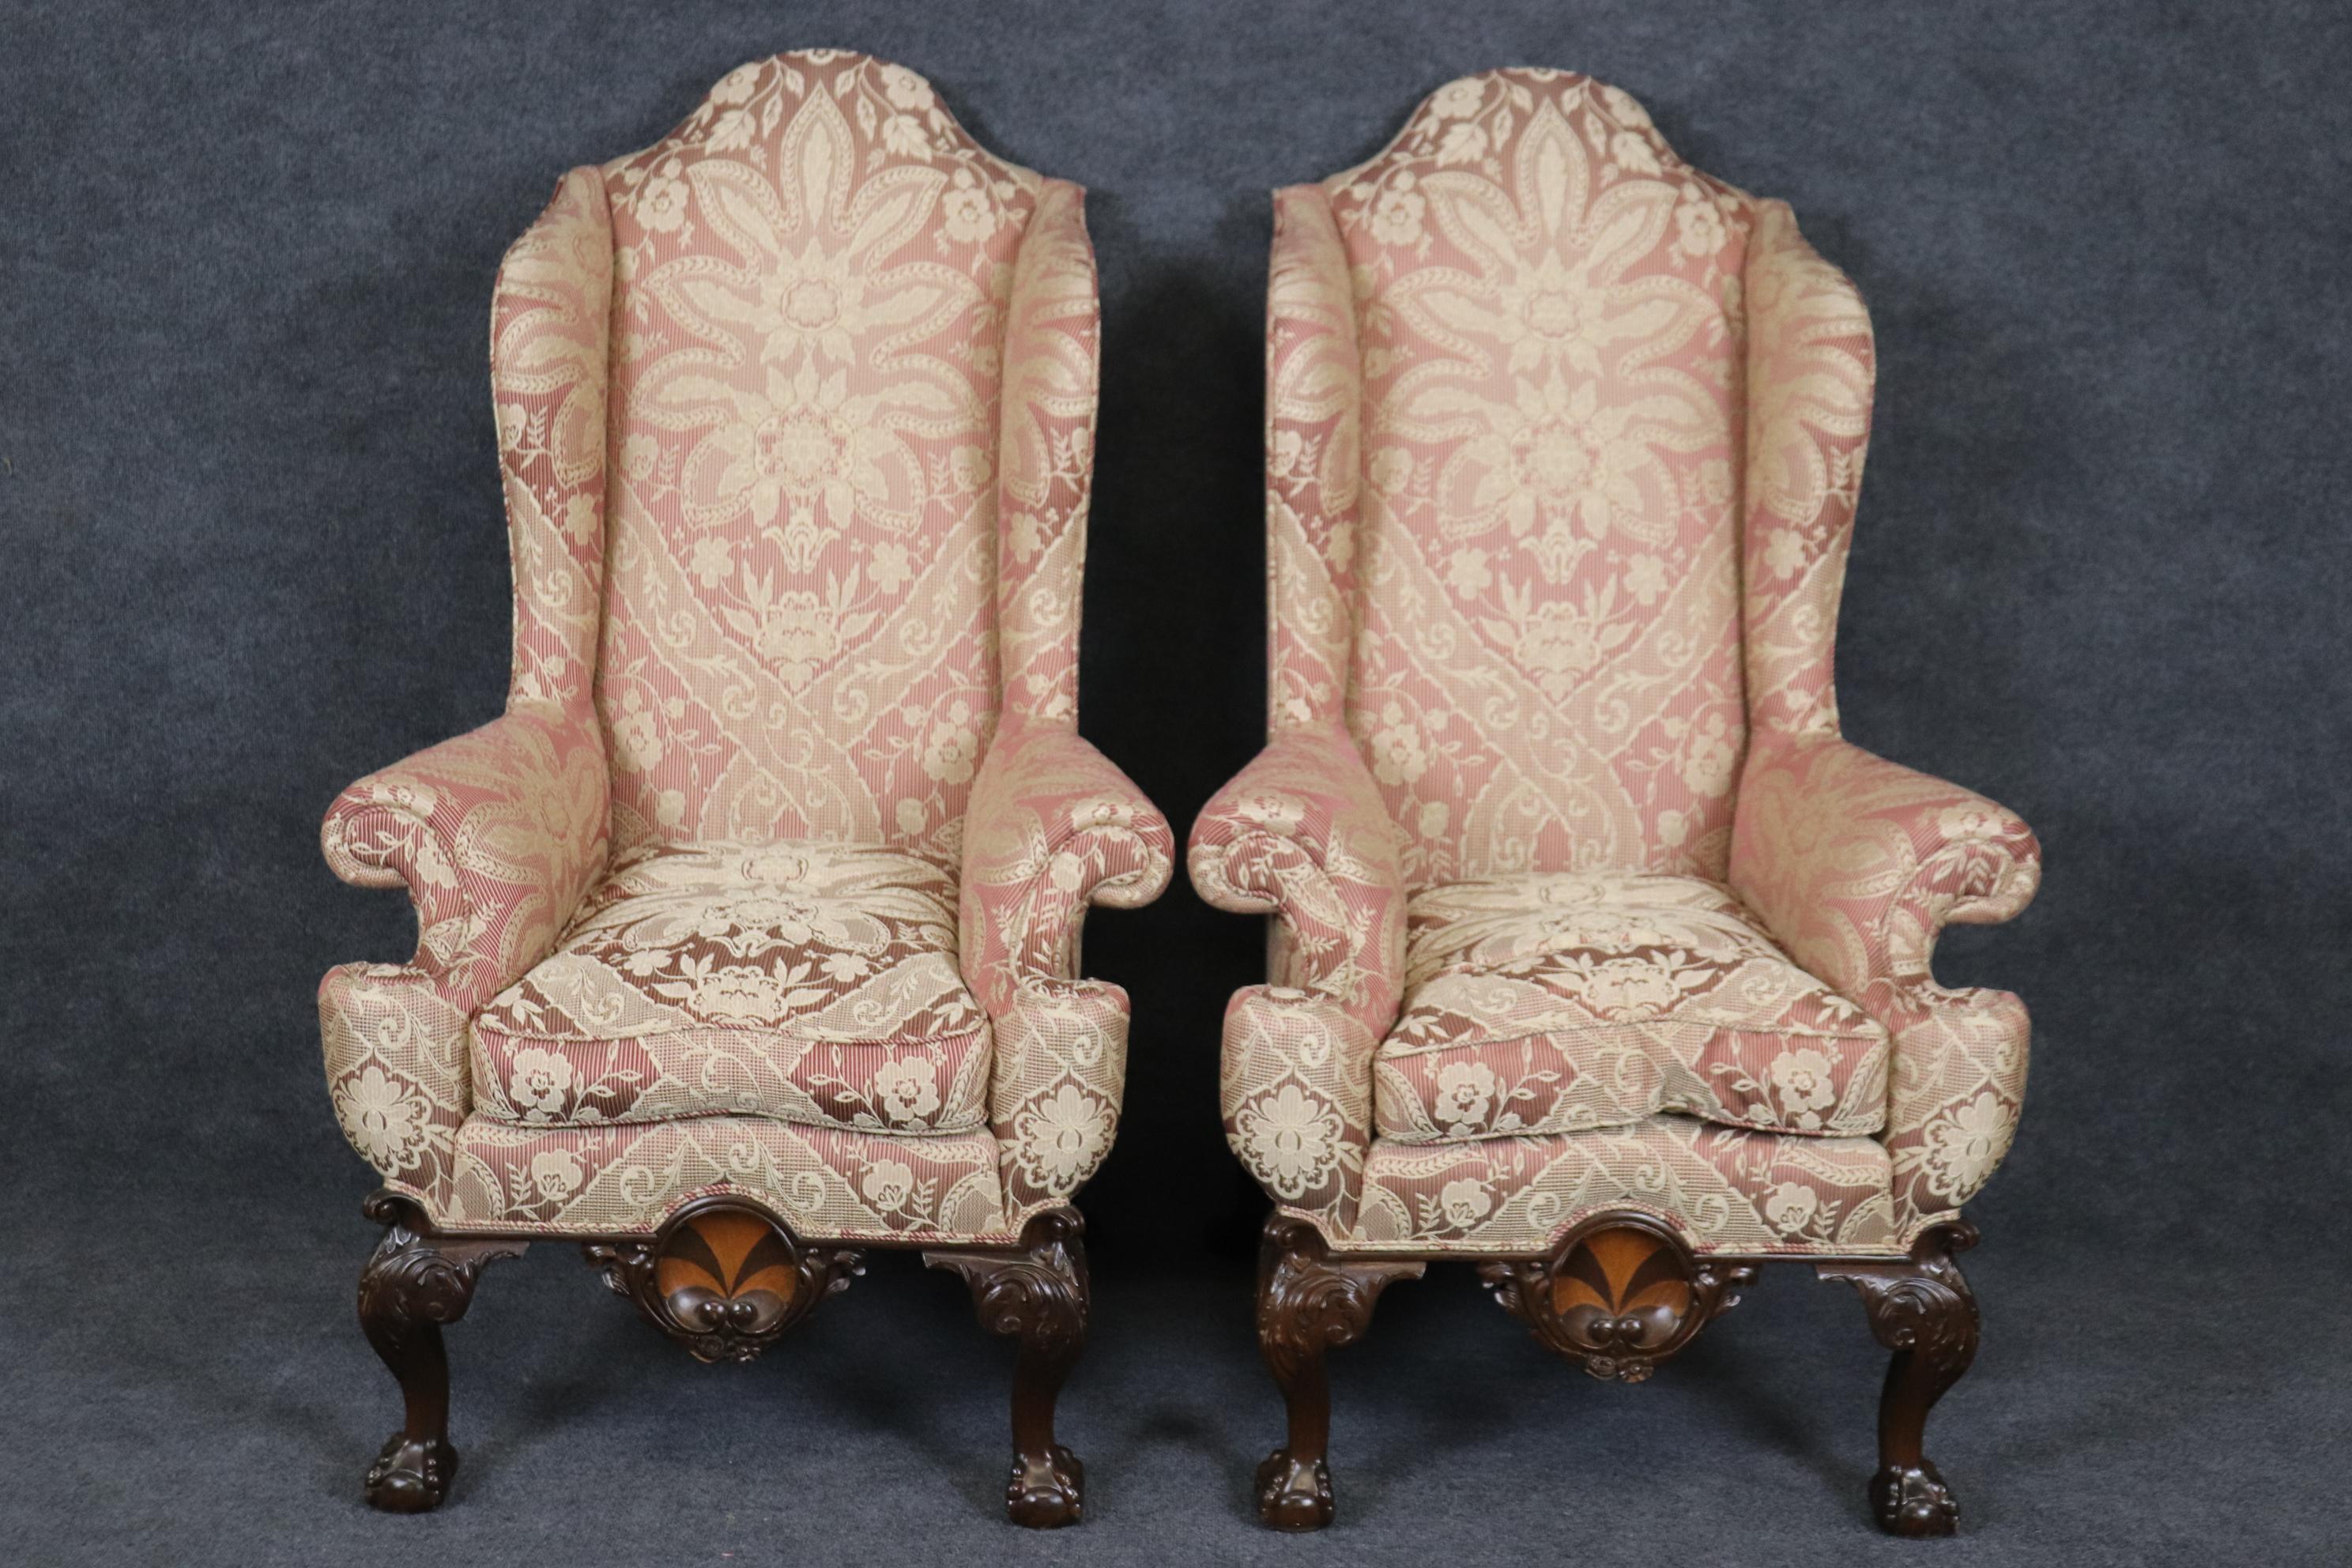 This is an impossing extremely large scale pair of Chippendale wingchairs. The chairs are in good antique condition and feature fresh upholstery that is used so it may not be perfect but seems very clean. They are extremely tall and comfortable.